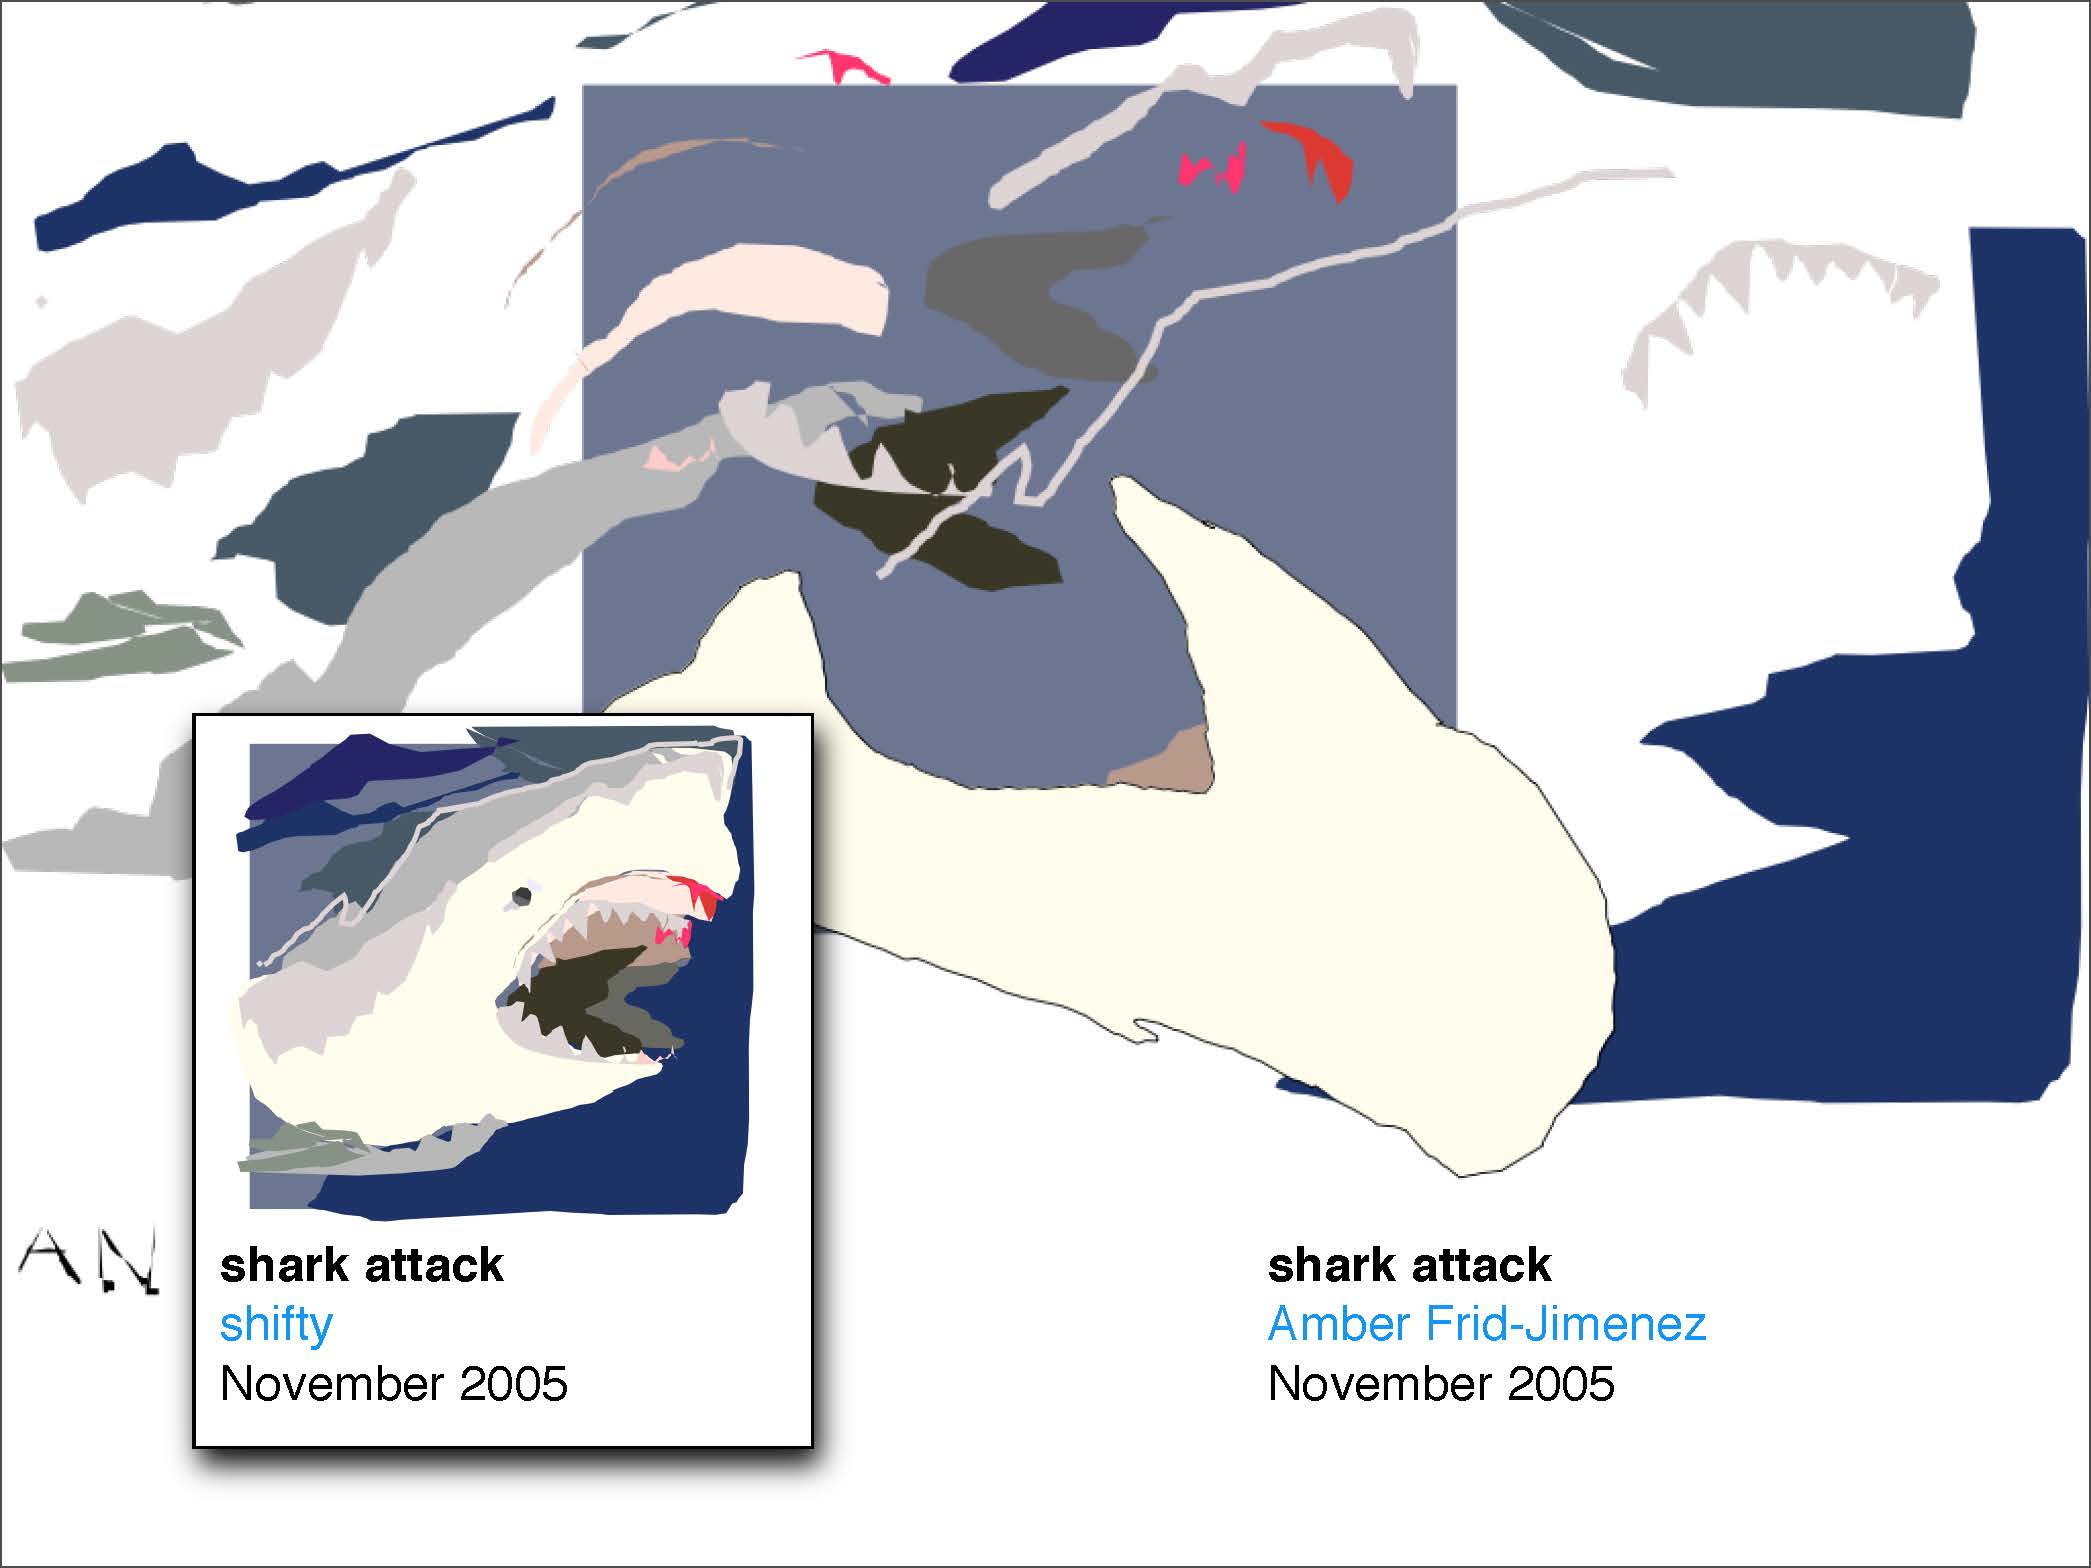 Dismantled shark drawing destroyed by one user, with the original reappropriated by another user